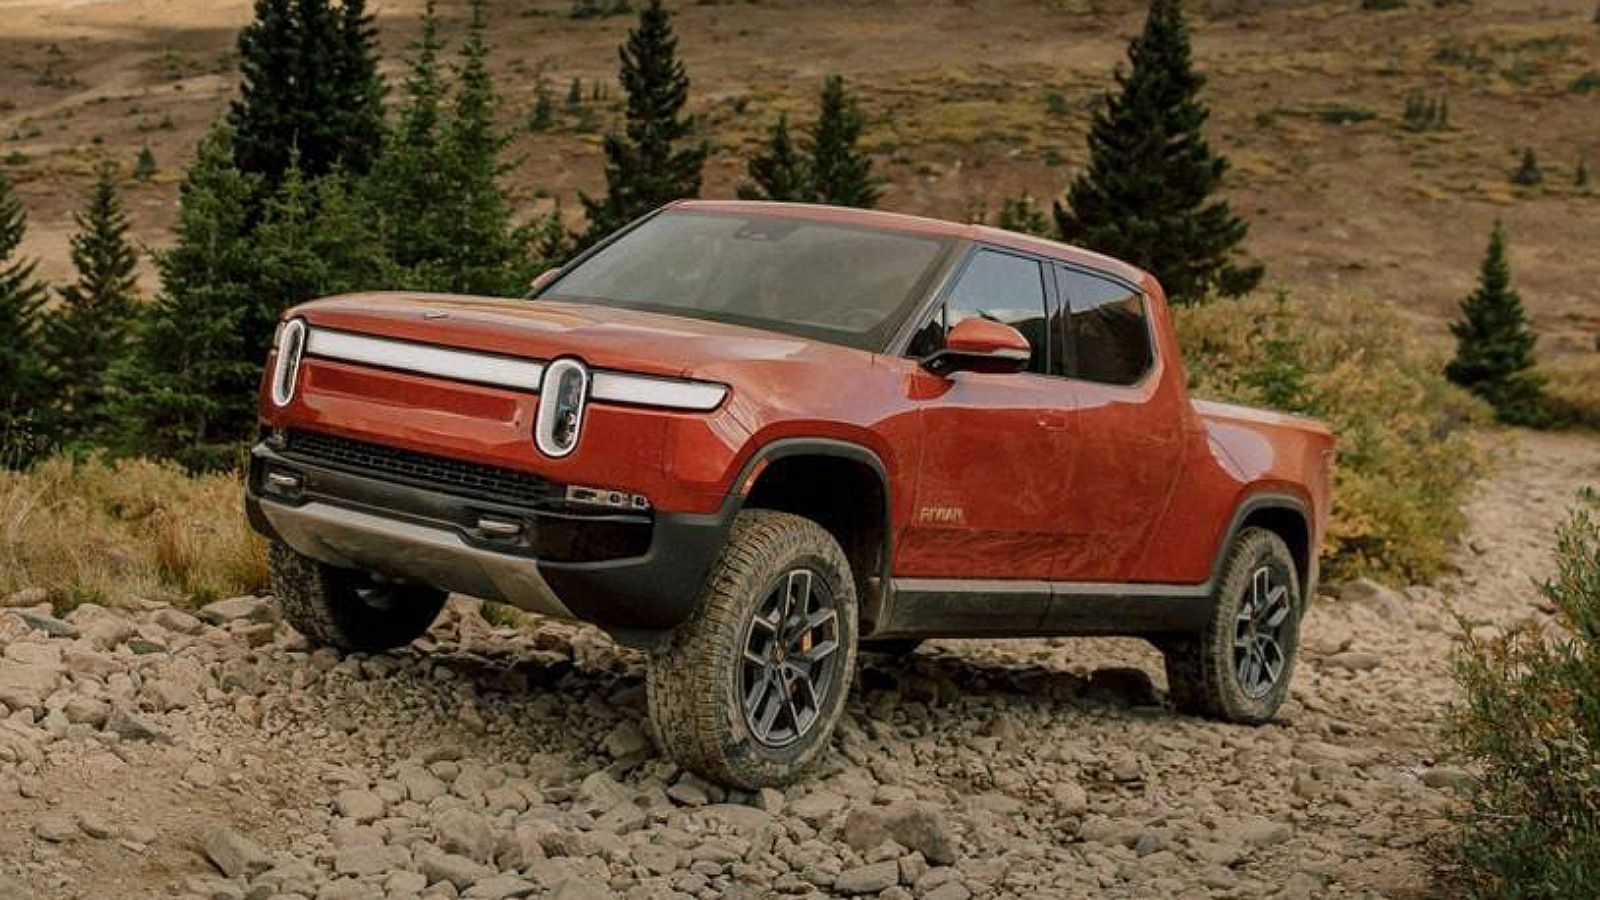 Red Canyon 2023 Rivian R1T